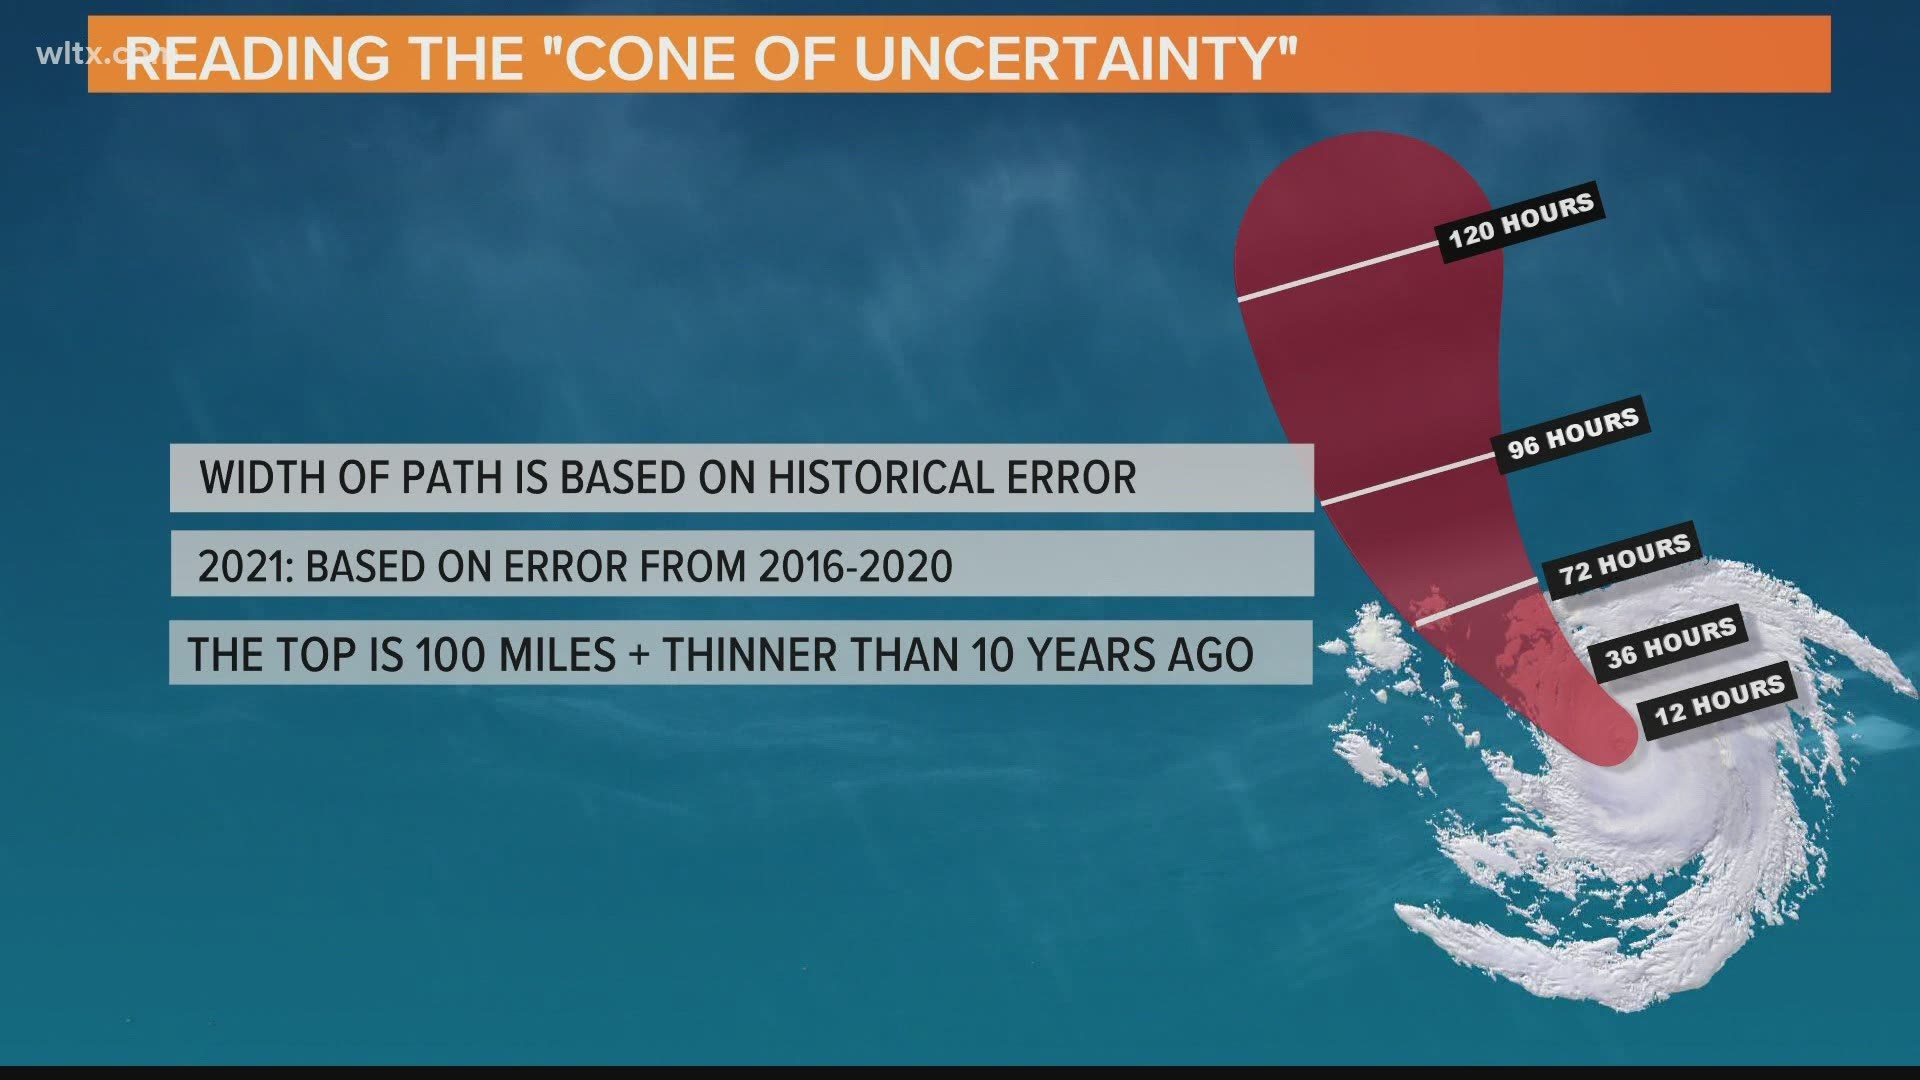 We've all seen the National Hurricane Center's 'cone of uncertainty' but do you know how to read it?